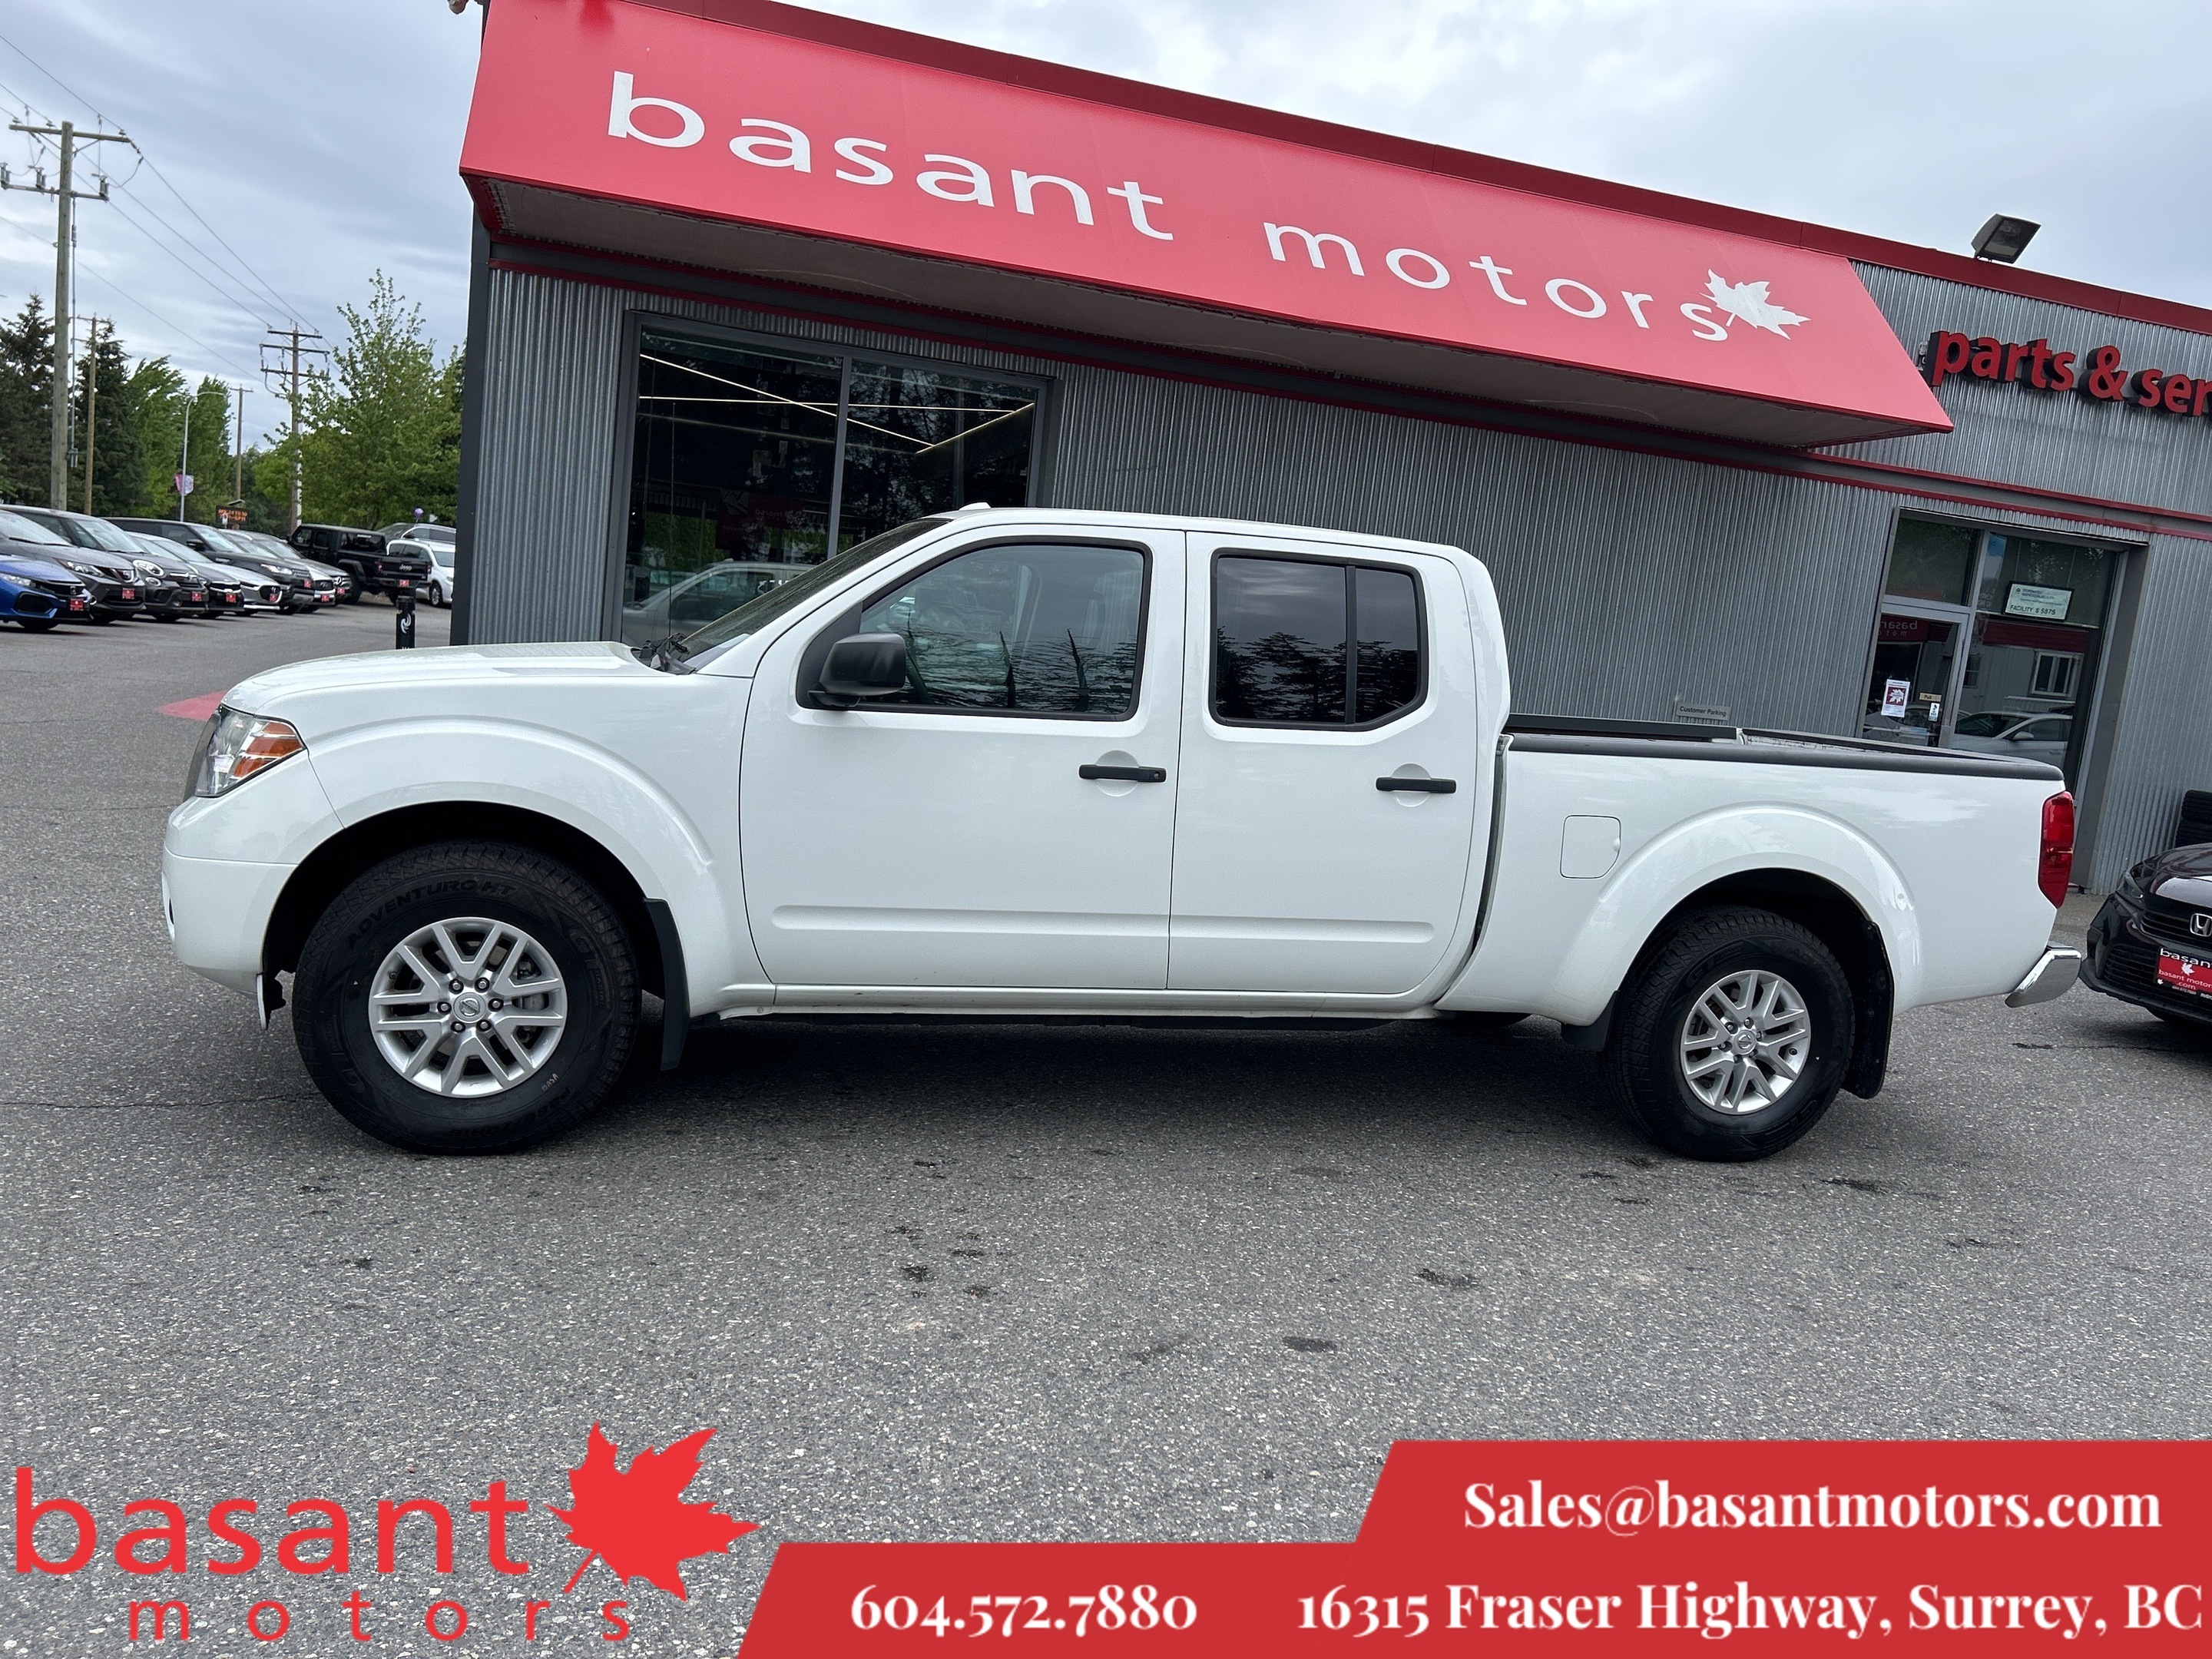 2016 Nissan Frontier LWB, Low KMs, Backup Cam, Alloy Wheels!